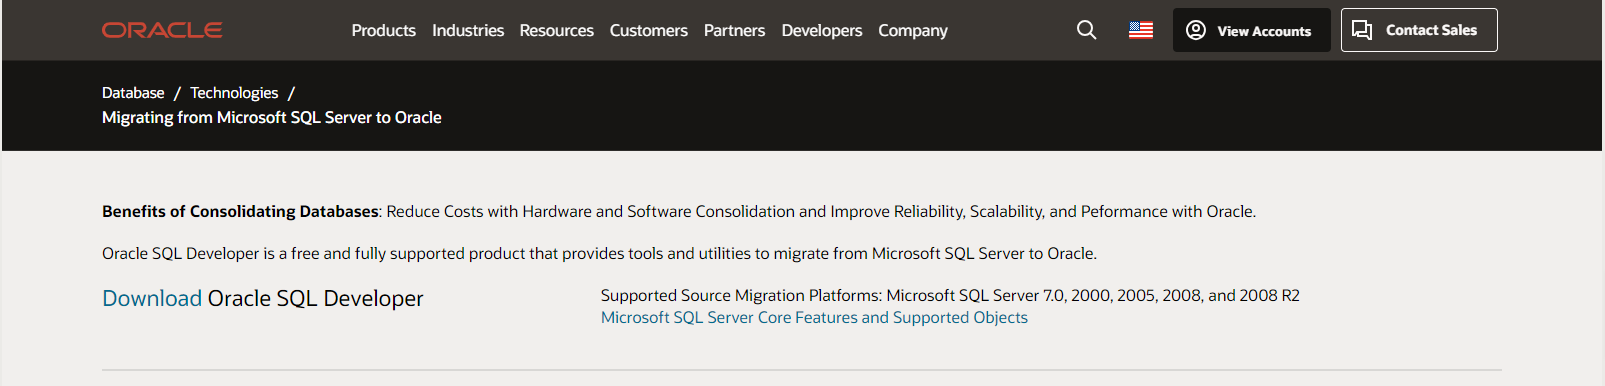 Oracle Migrator MSSQL to Oracle